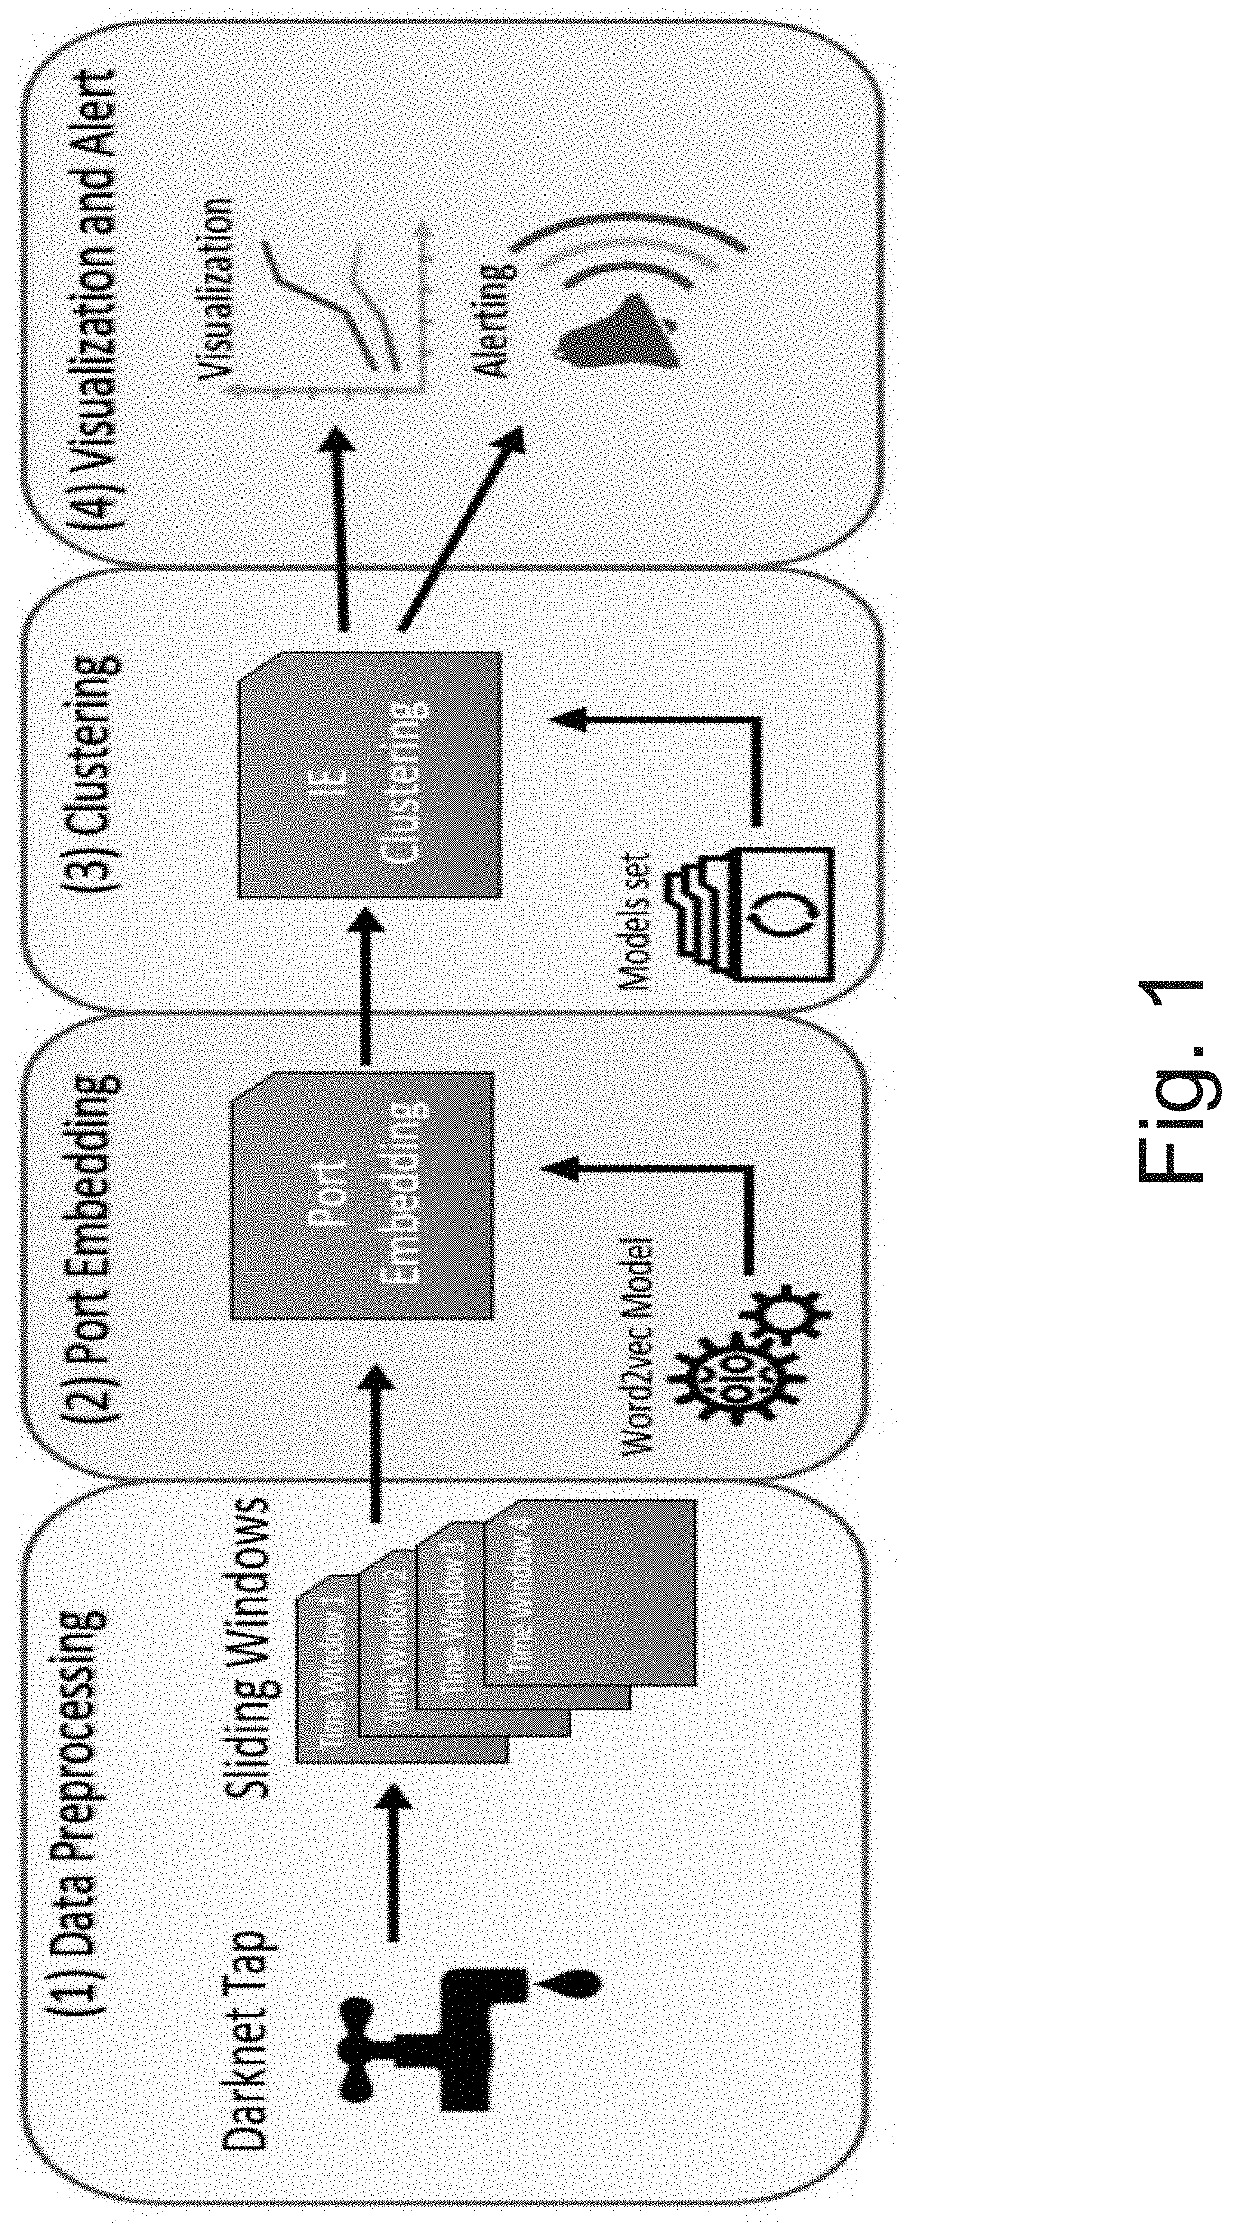 Method and system for clustering darknet traffic streams with word embeddings